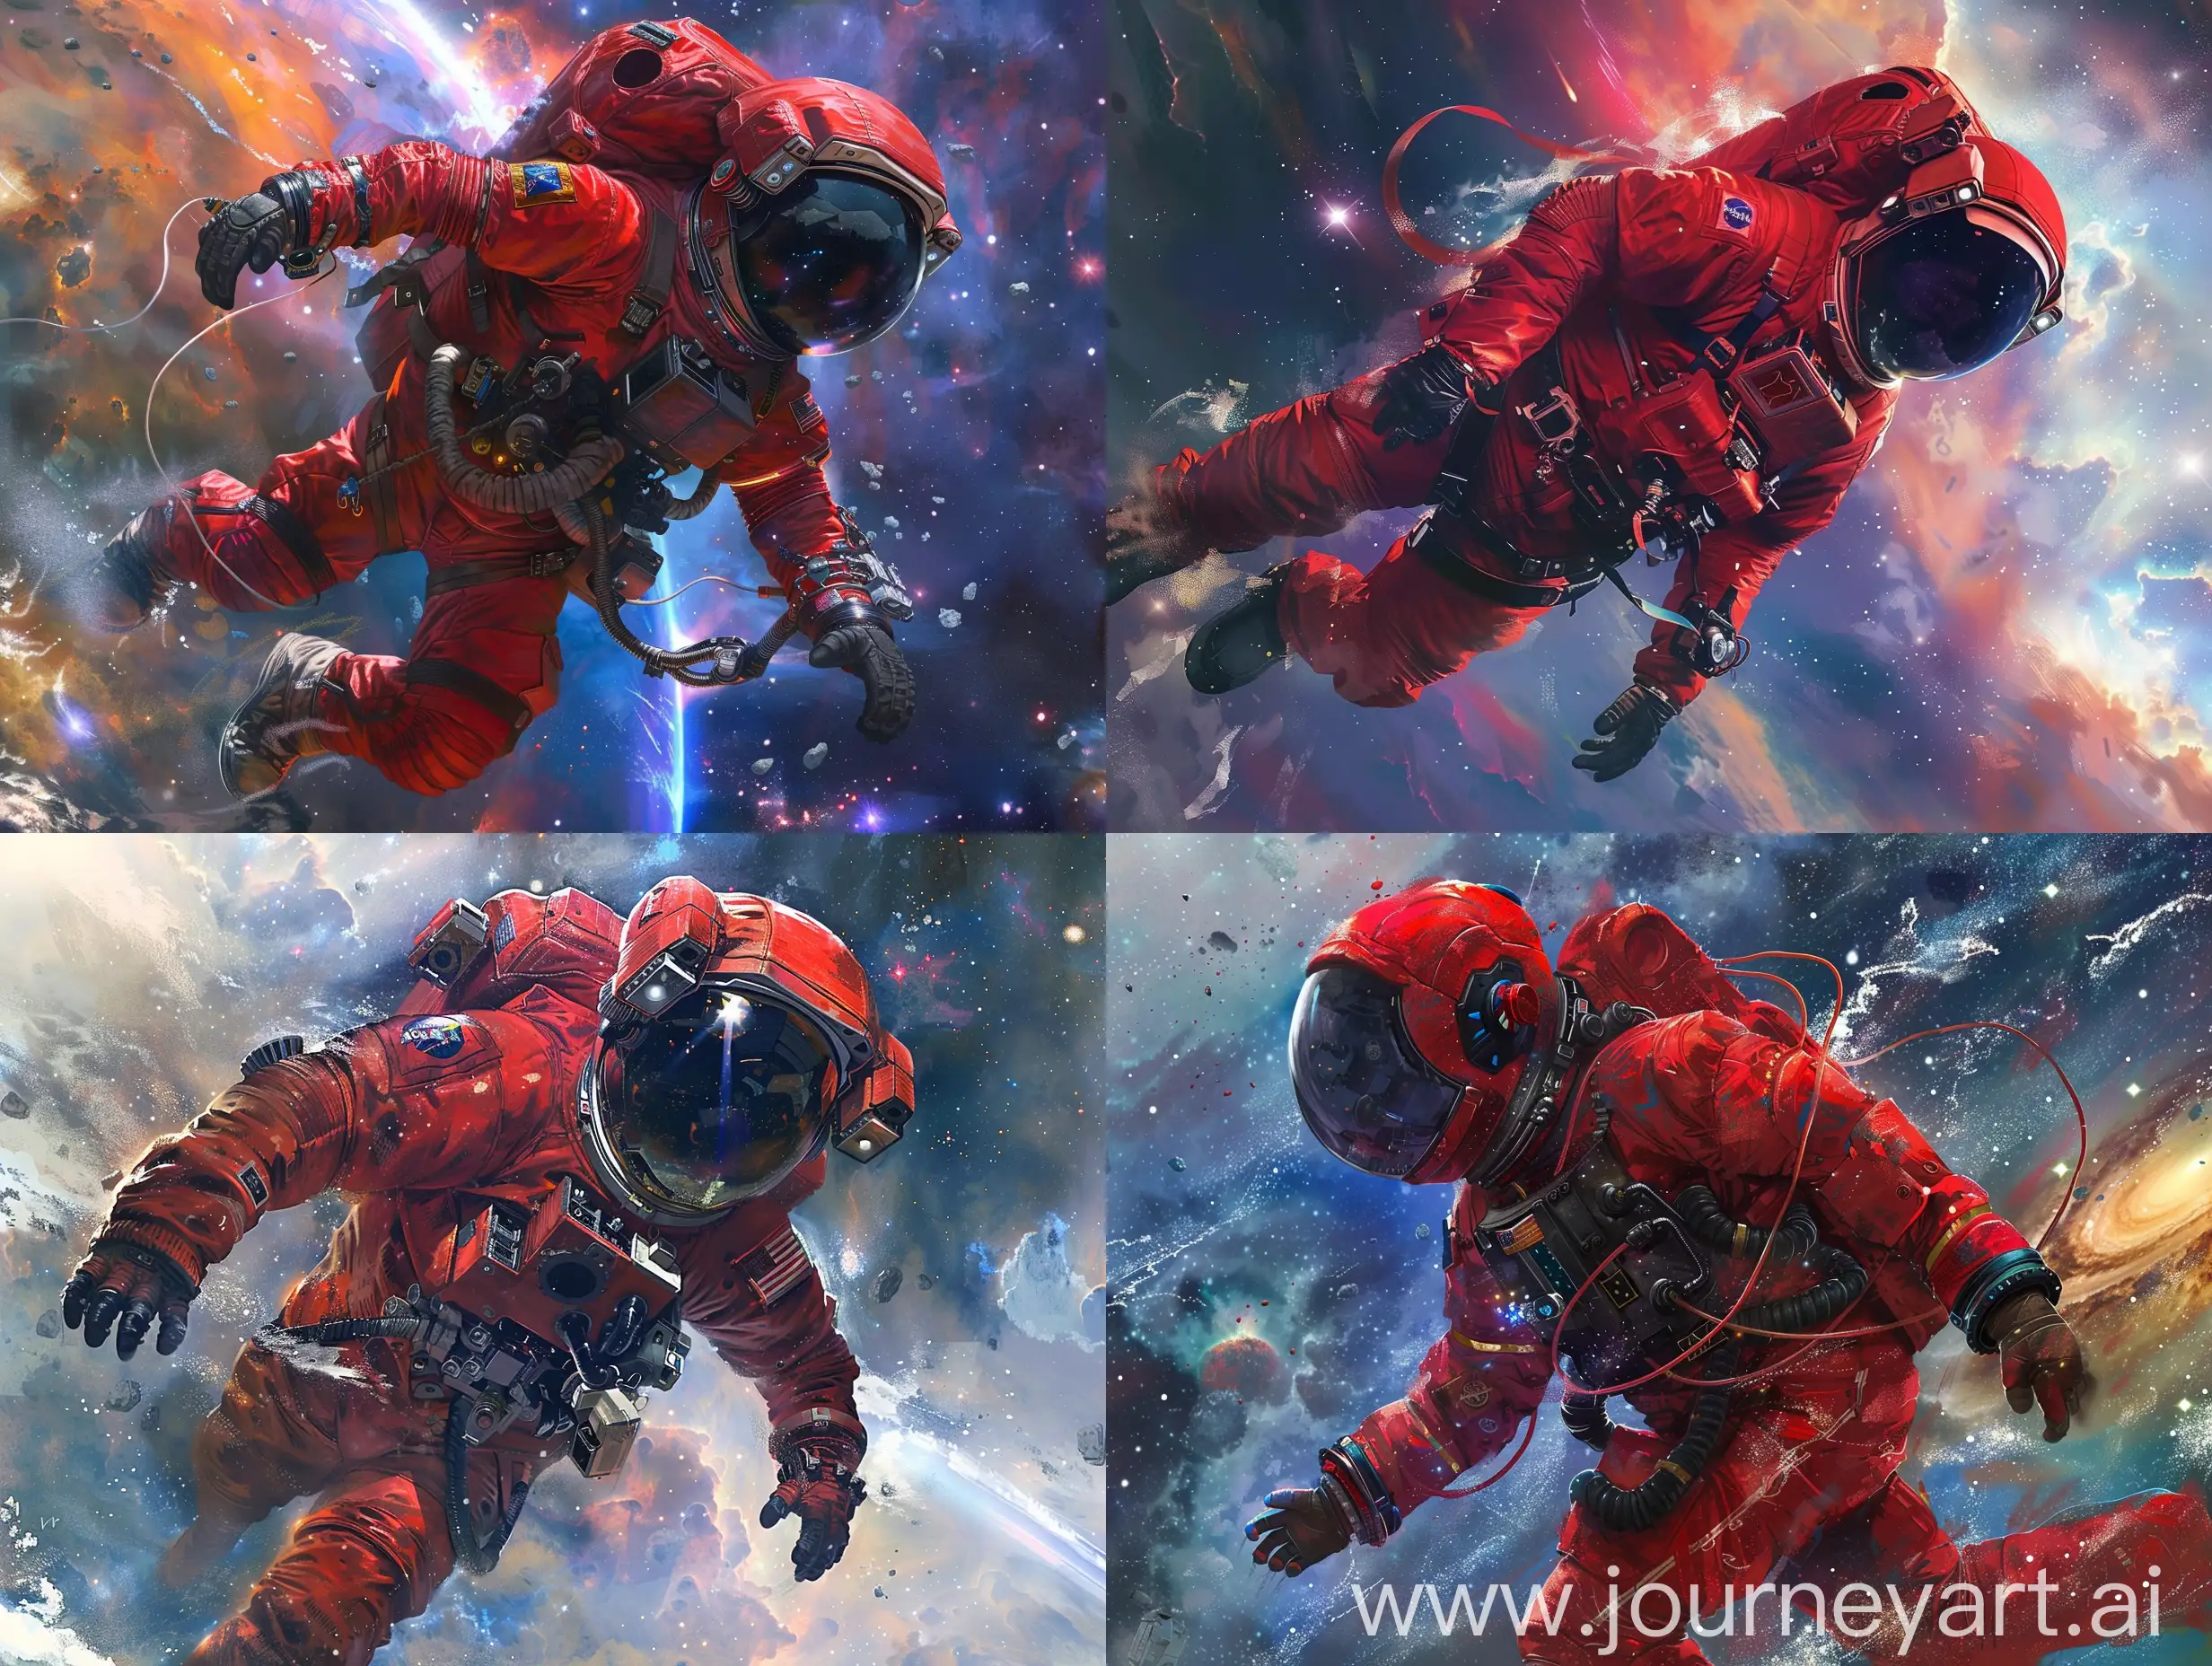 Exploring-the-Cosmos-Red-Astronaut-in-HighTech-Suit